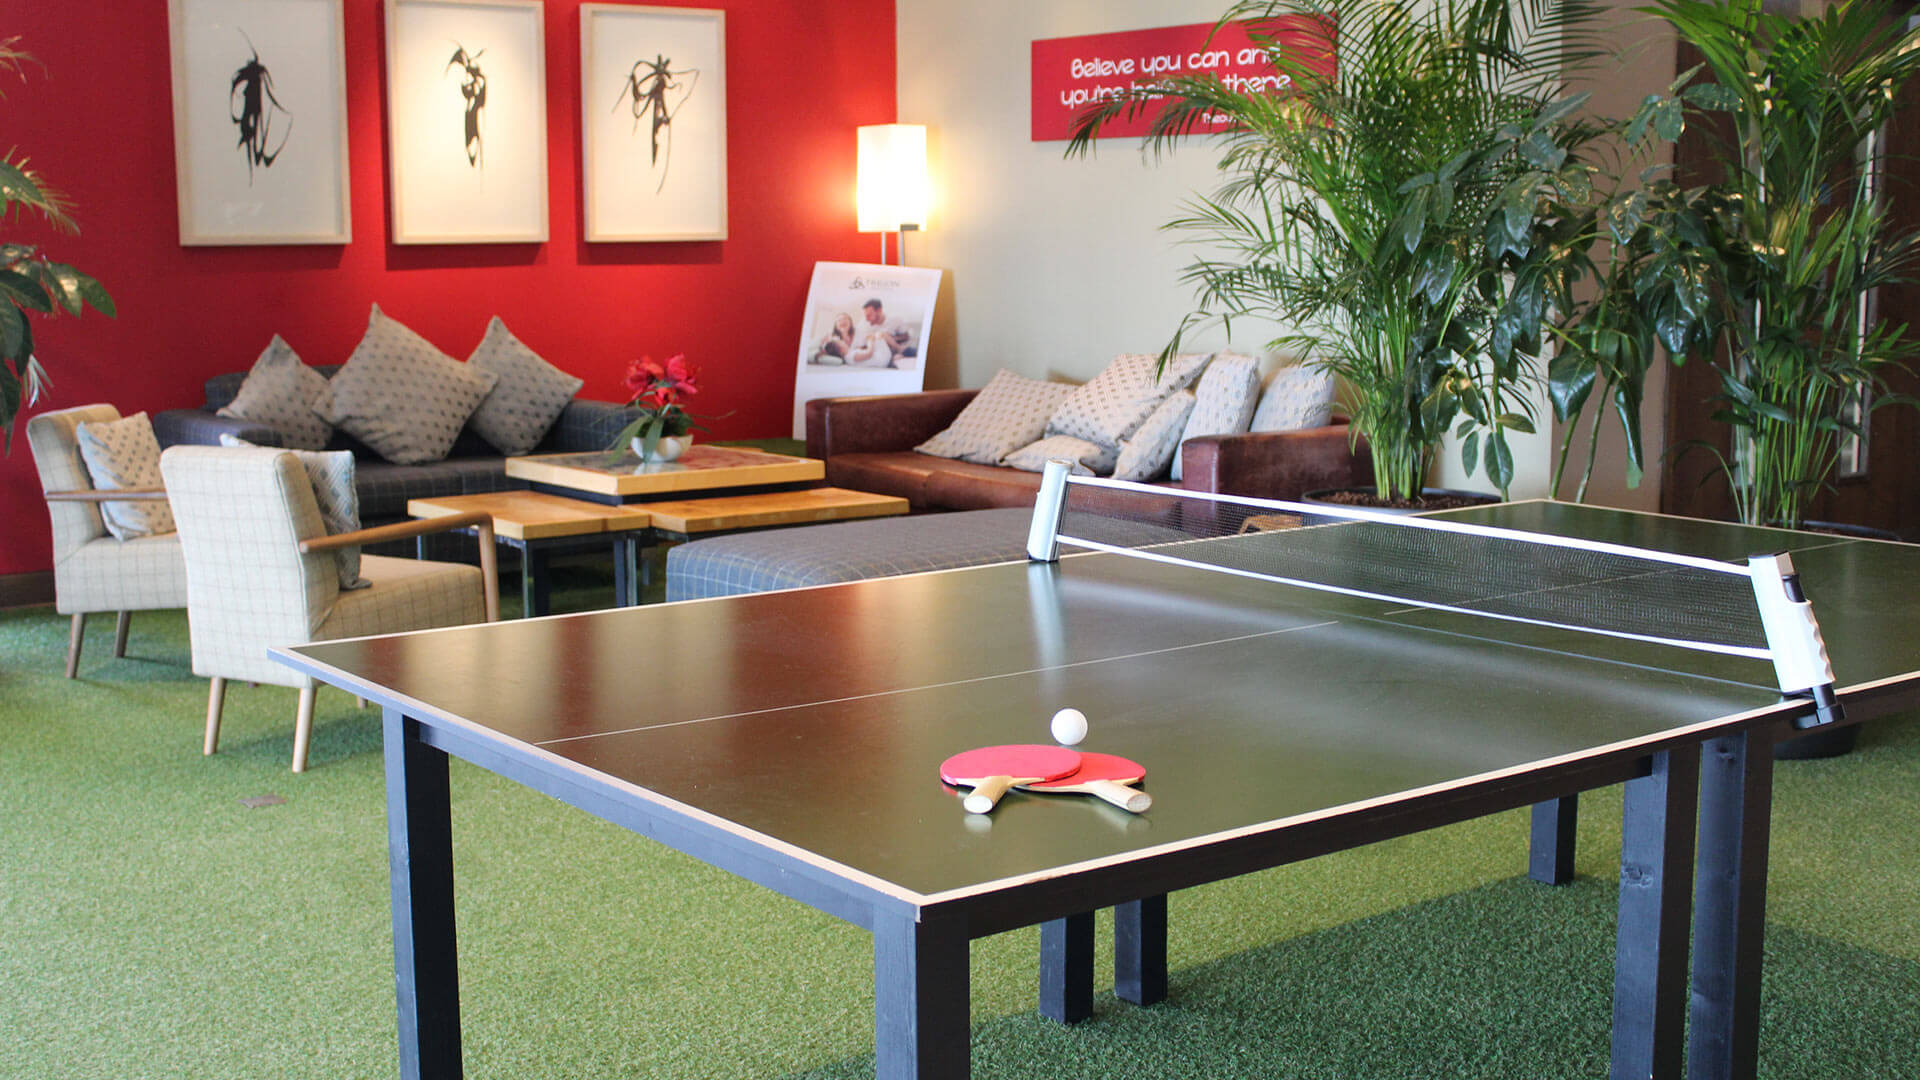 table tennis table in lounge area